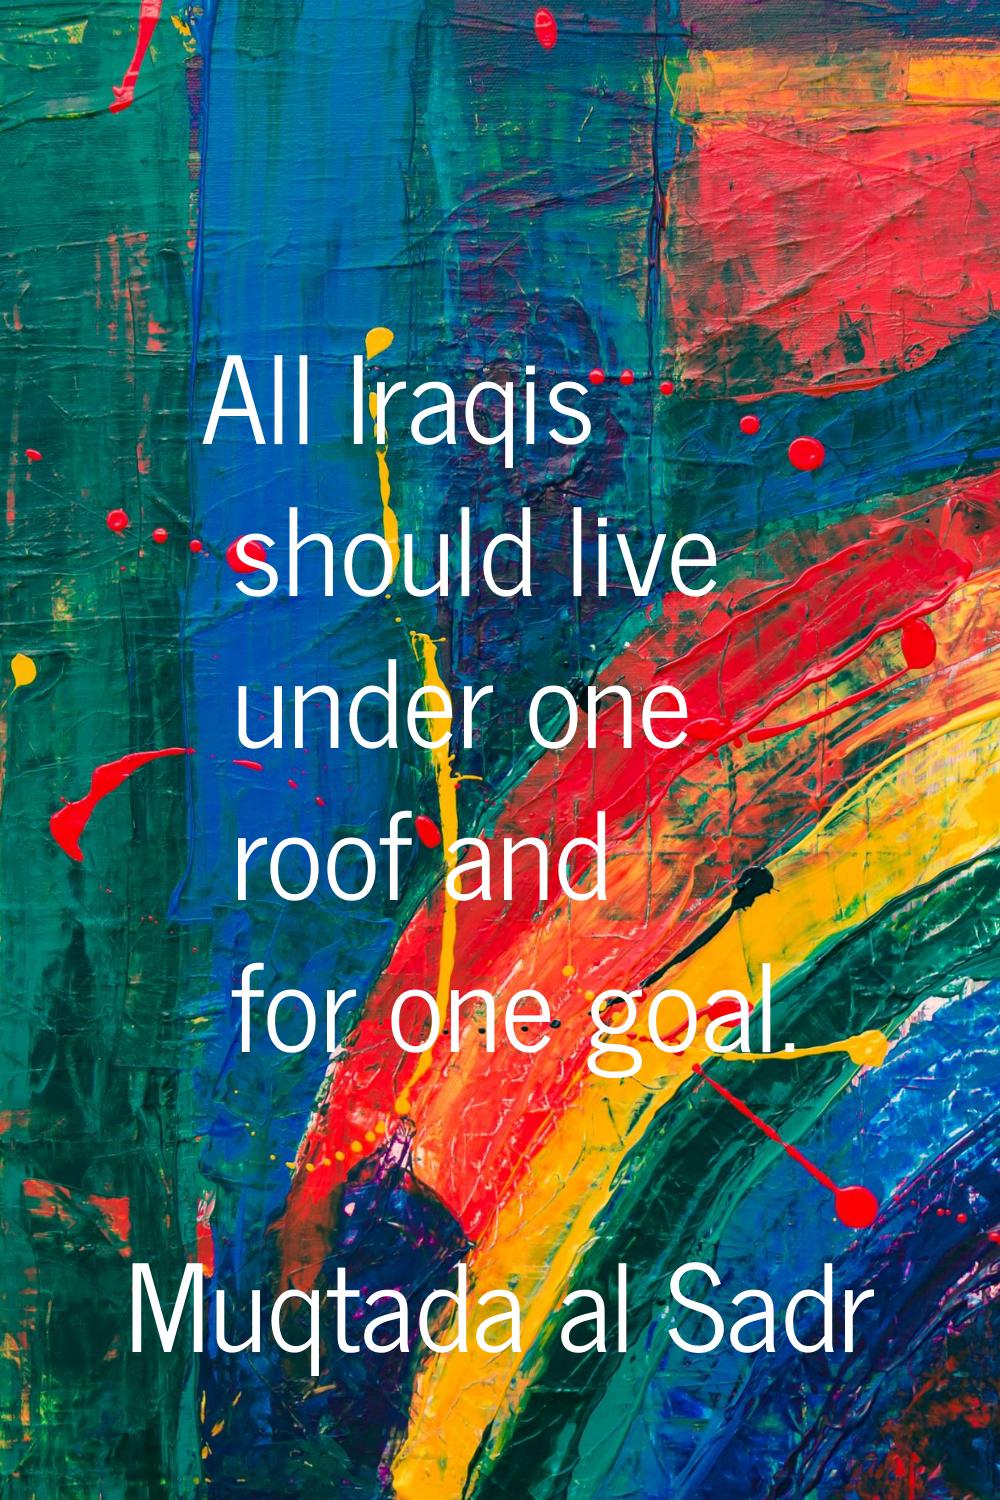 All Iraqis should live under one roof and for one goal.